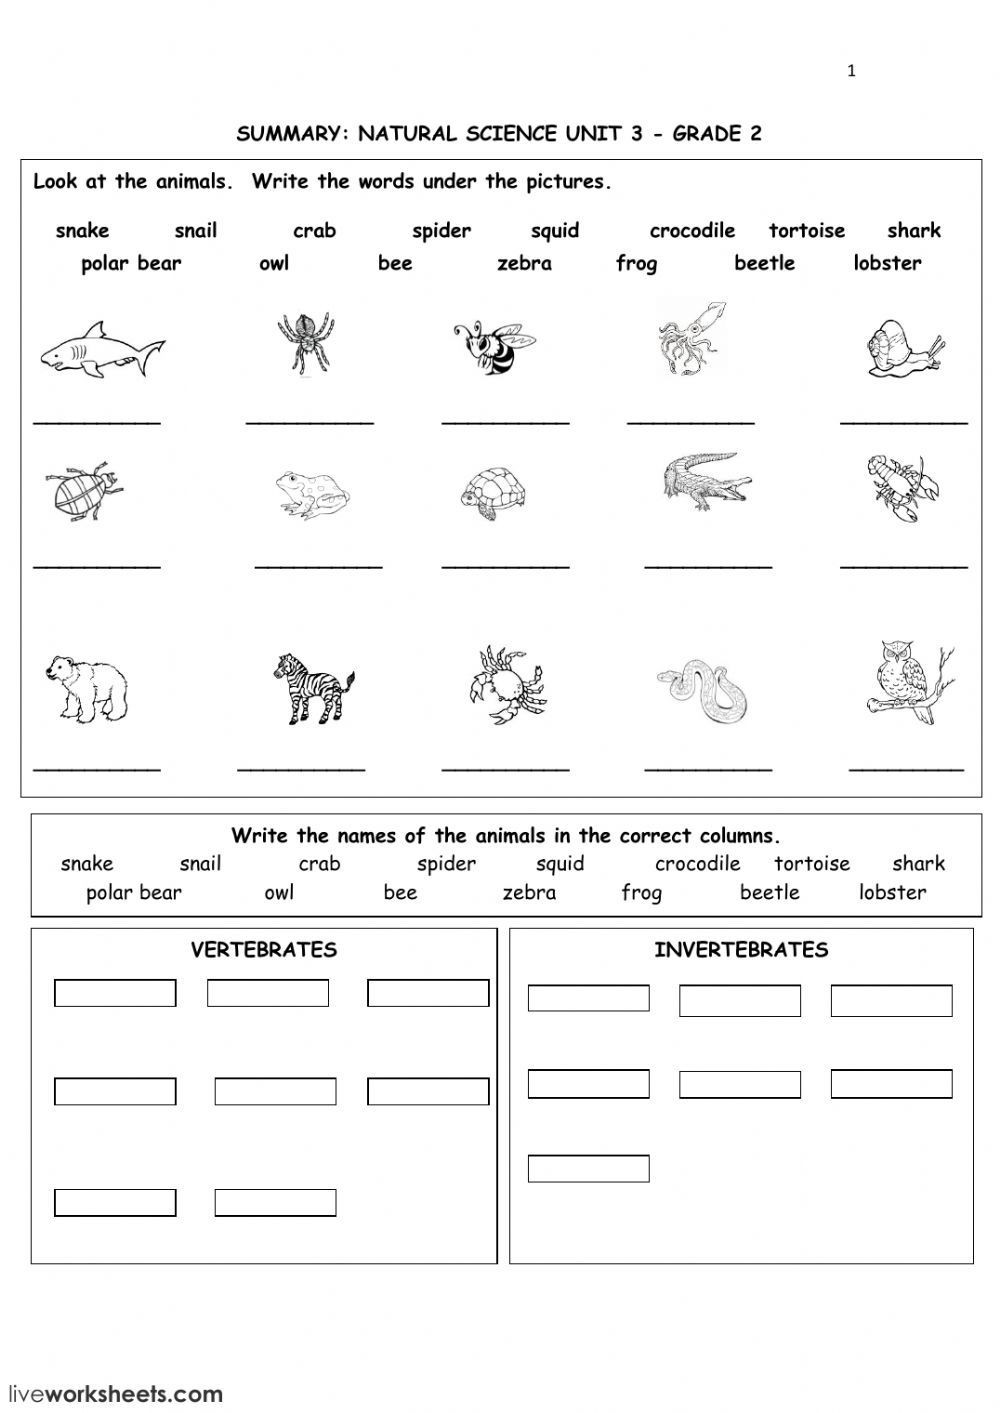 Domains and Kingdoms Worksheet the Animal Kingdom Interactive and Able Worksheet